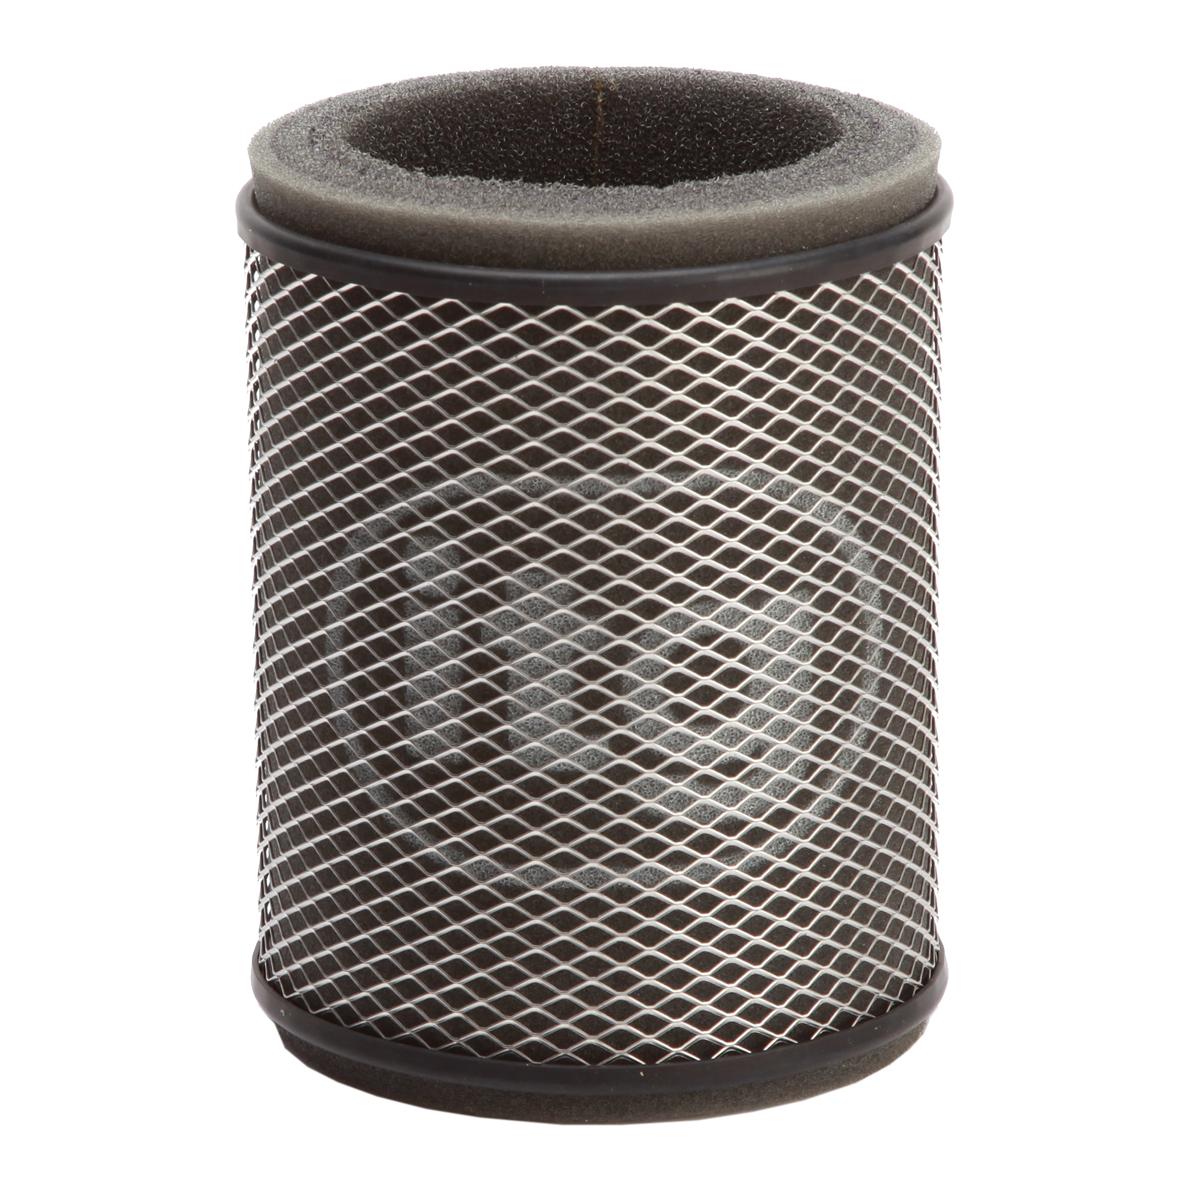 ITG Air Filter For Rover Sd1 Turbo Diesel